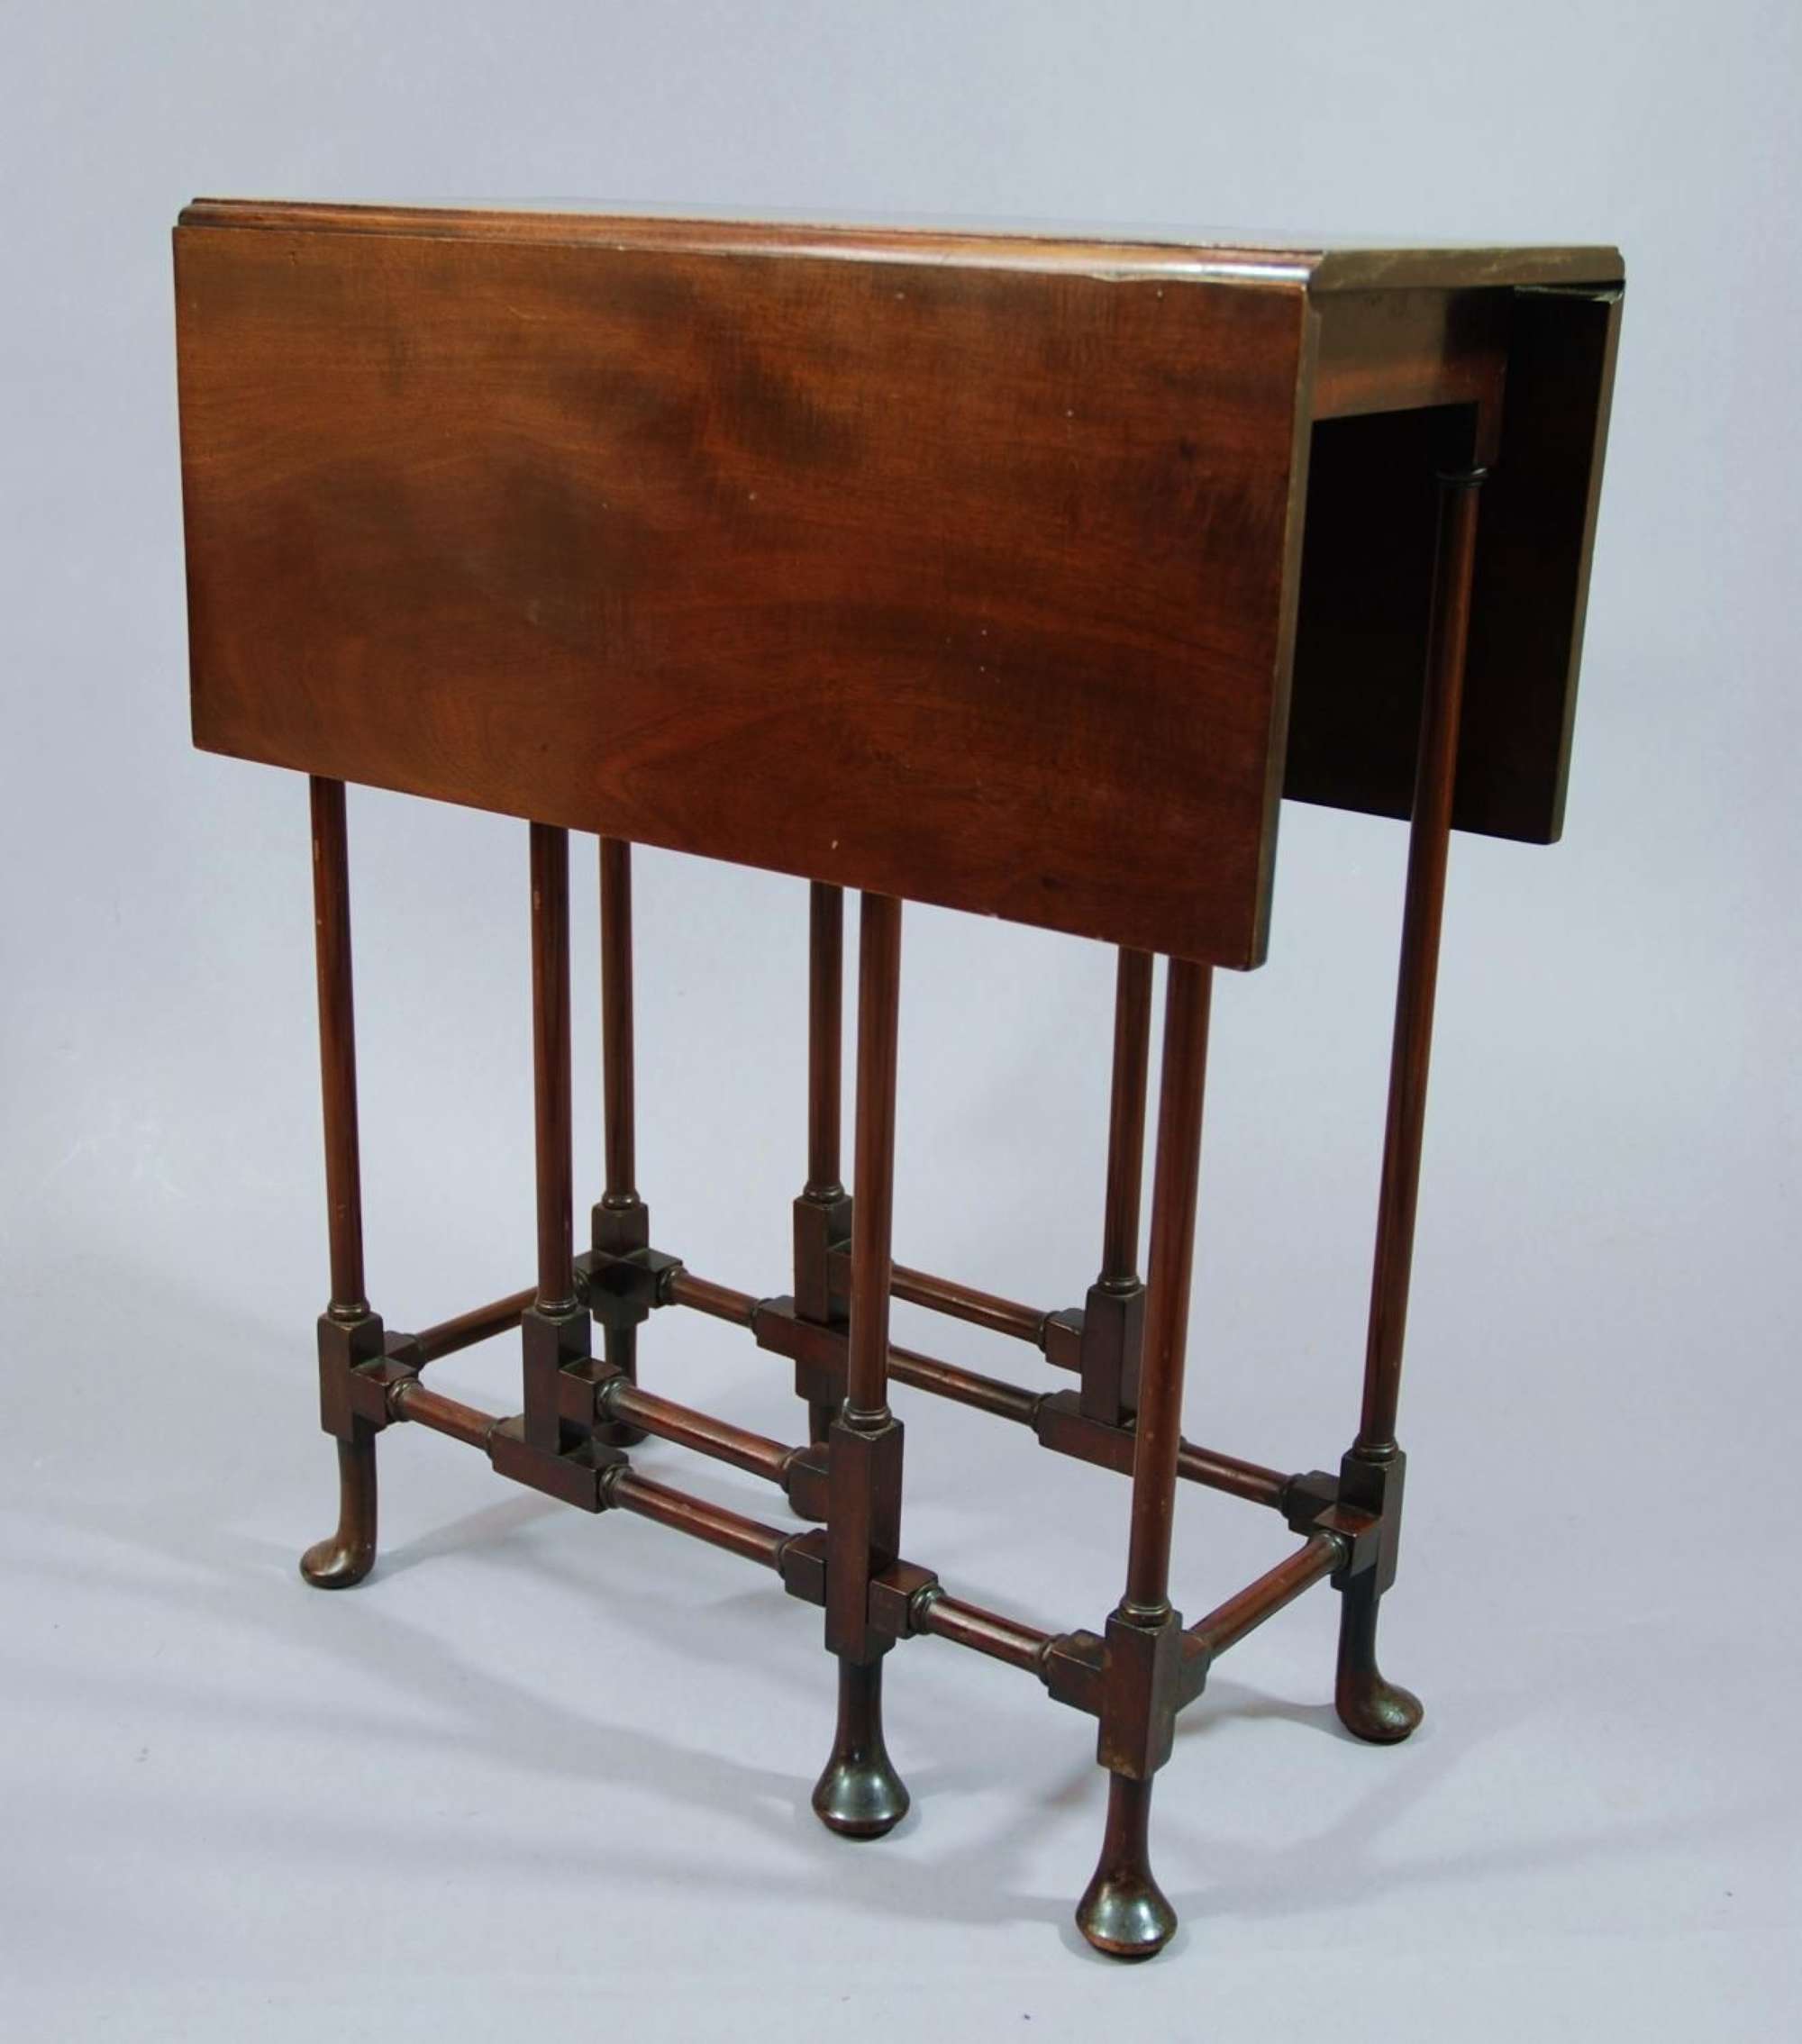 Late 19thc mahogany drop leaf spider table